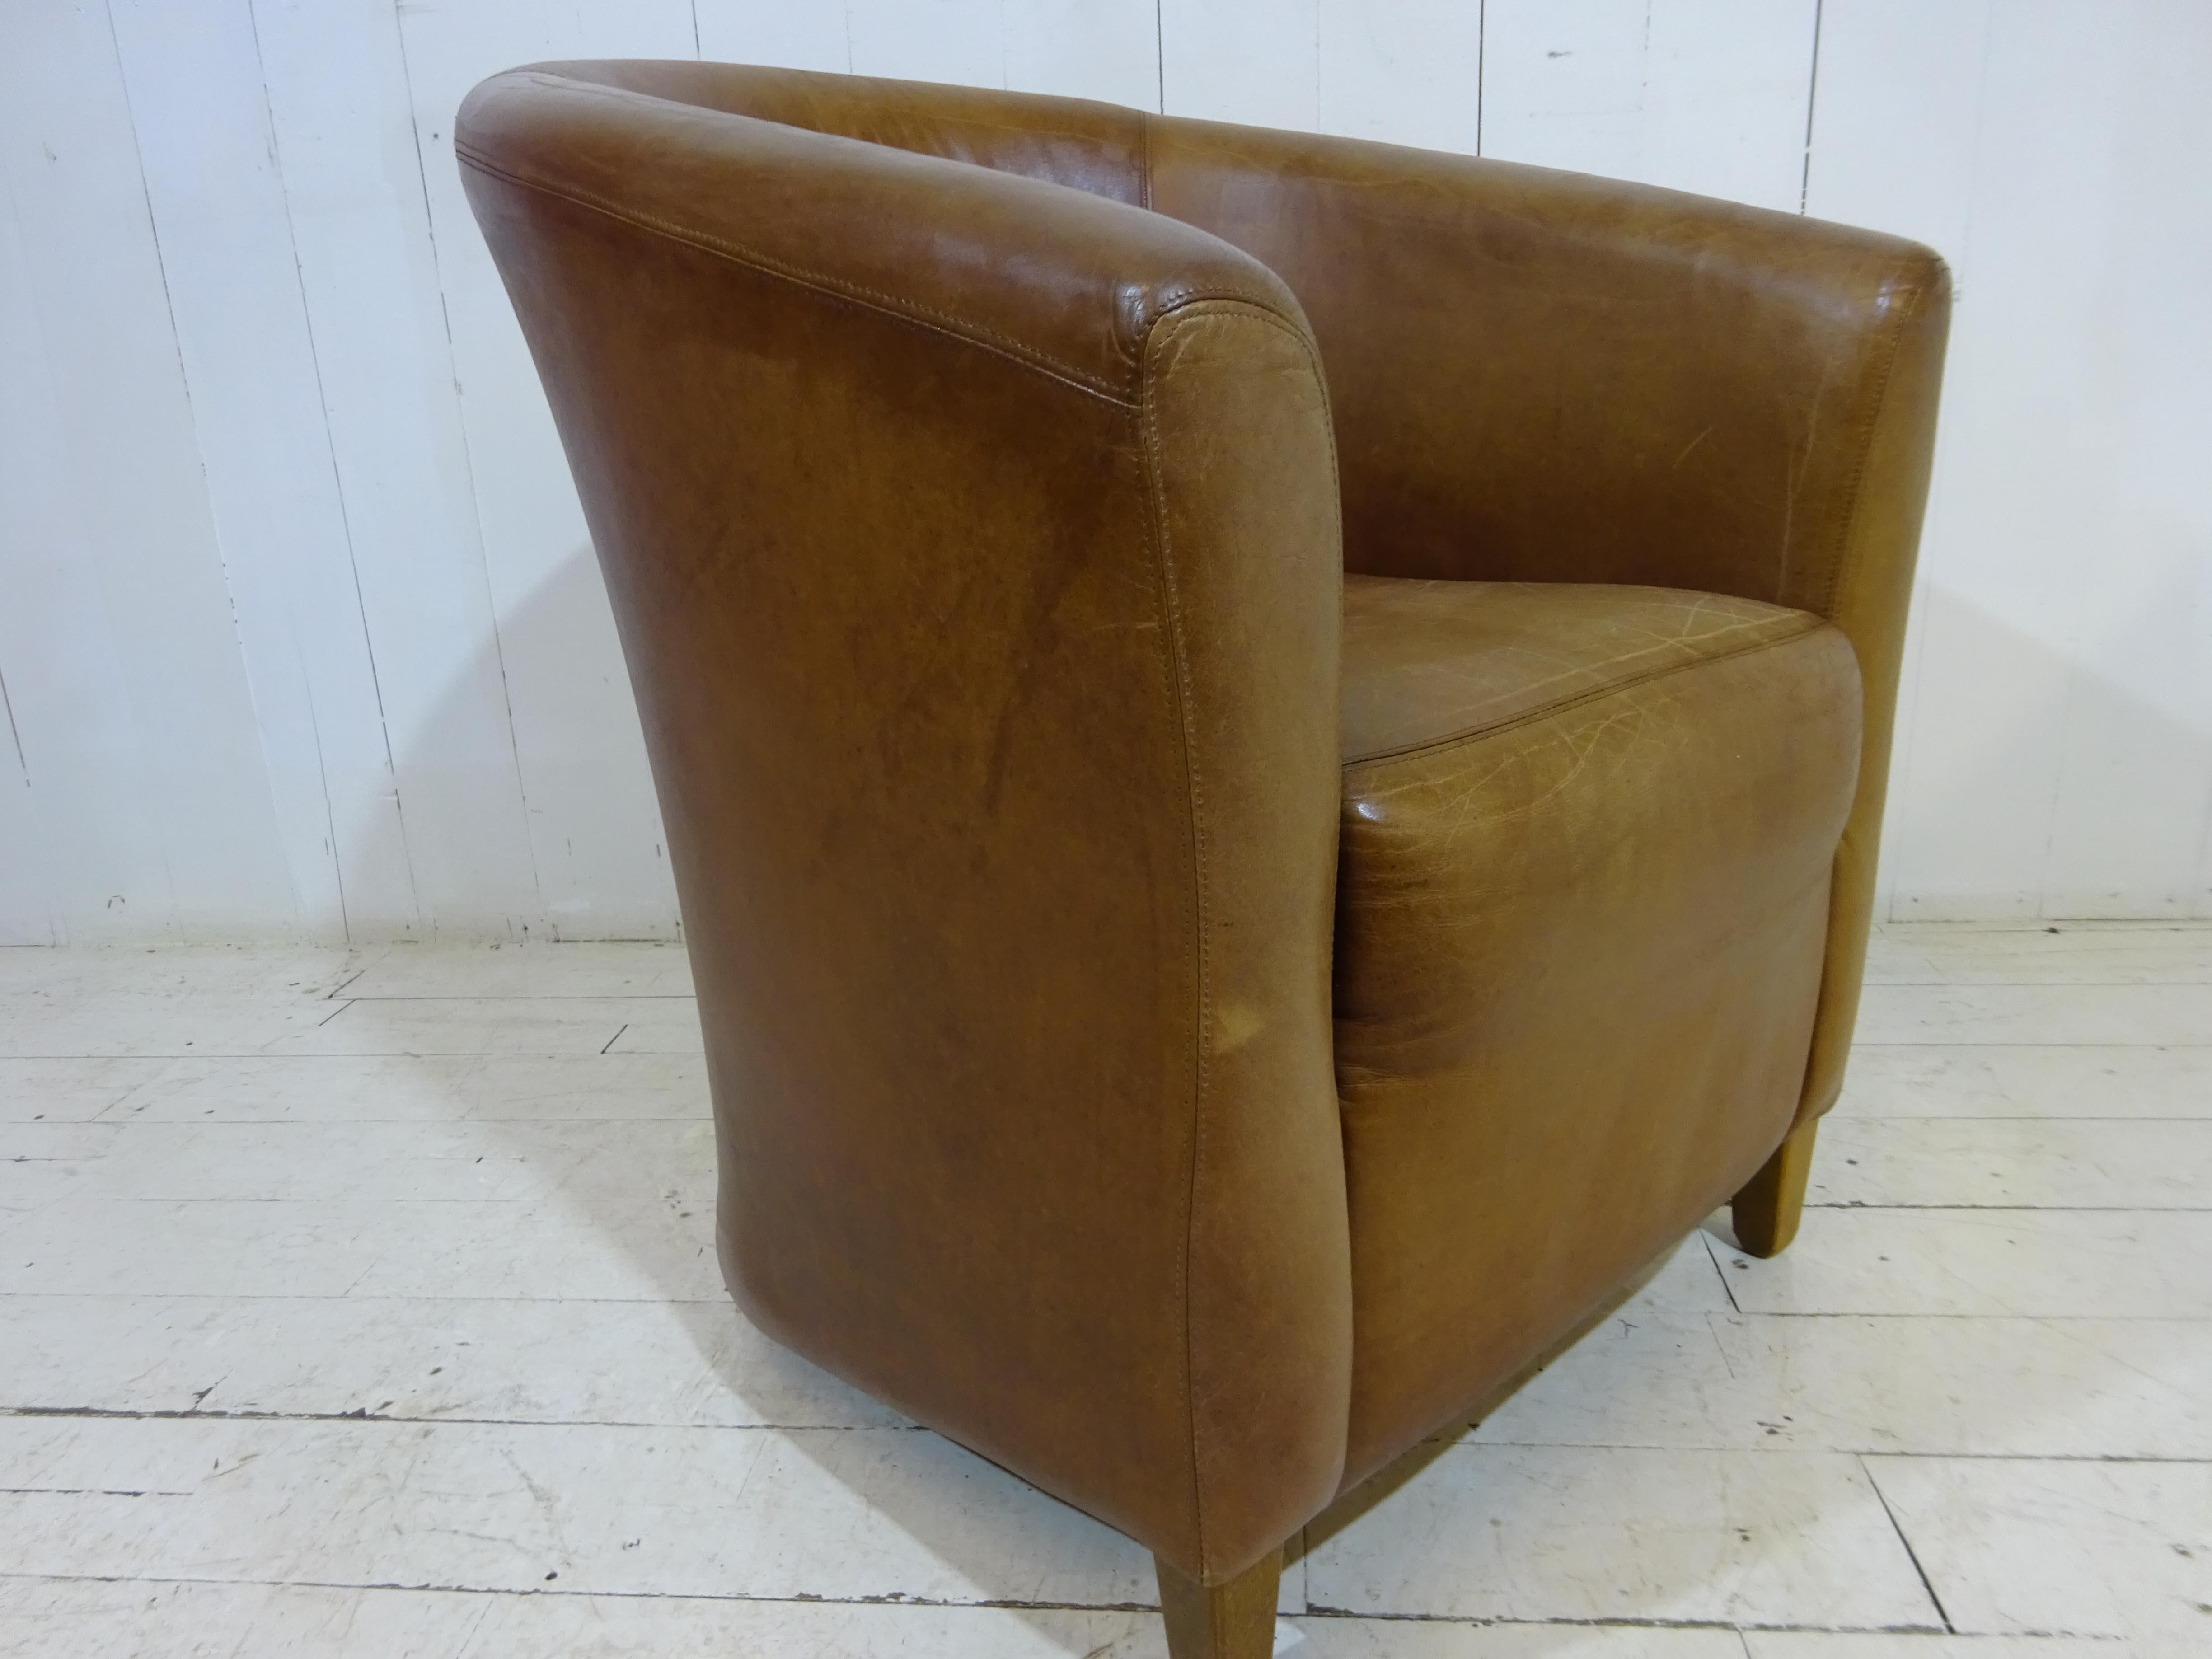 Late 20th Century Retro Hotel Tub Chair in Distressed Tan Leather